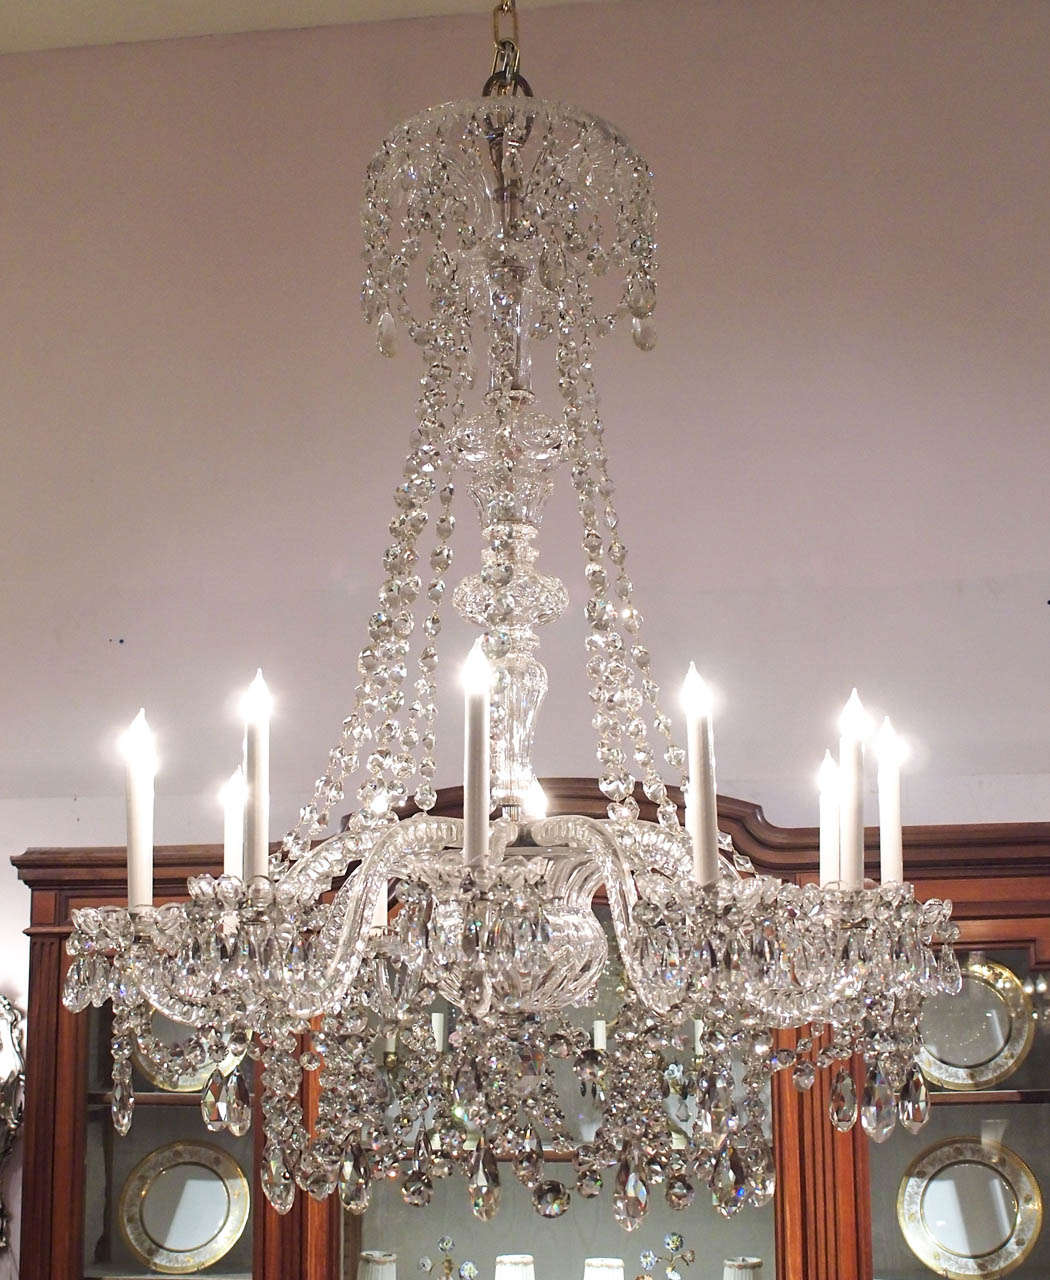 Antique English waterford lead crystal early 19th century original chandelier.